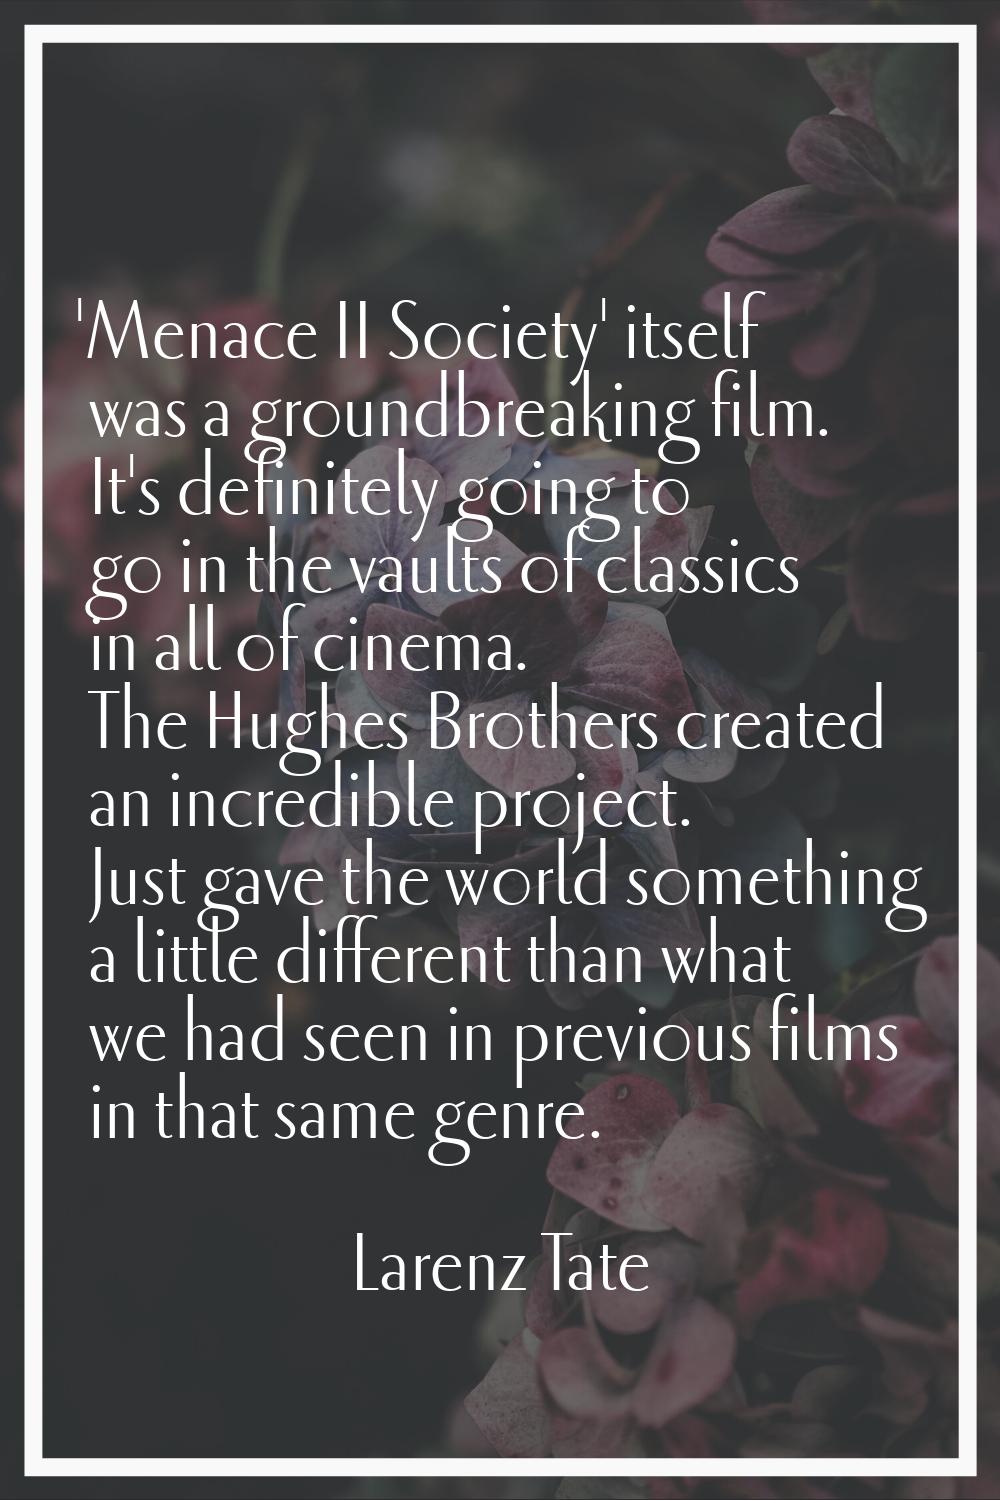 'Menace II Society' itself was a groundbreaking film. It's definitely going to go in the vaults of 